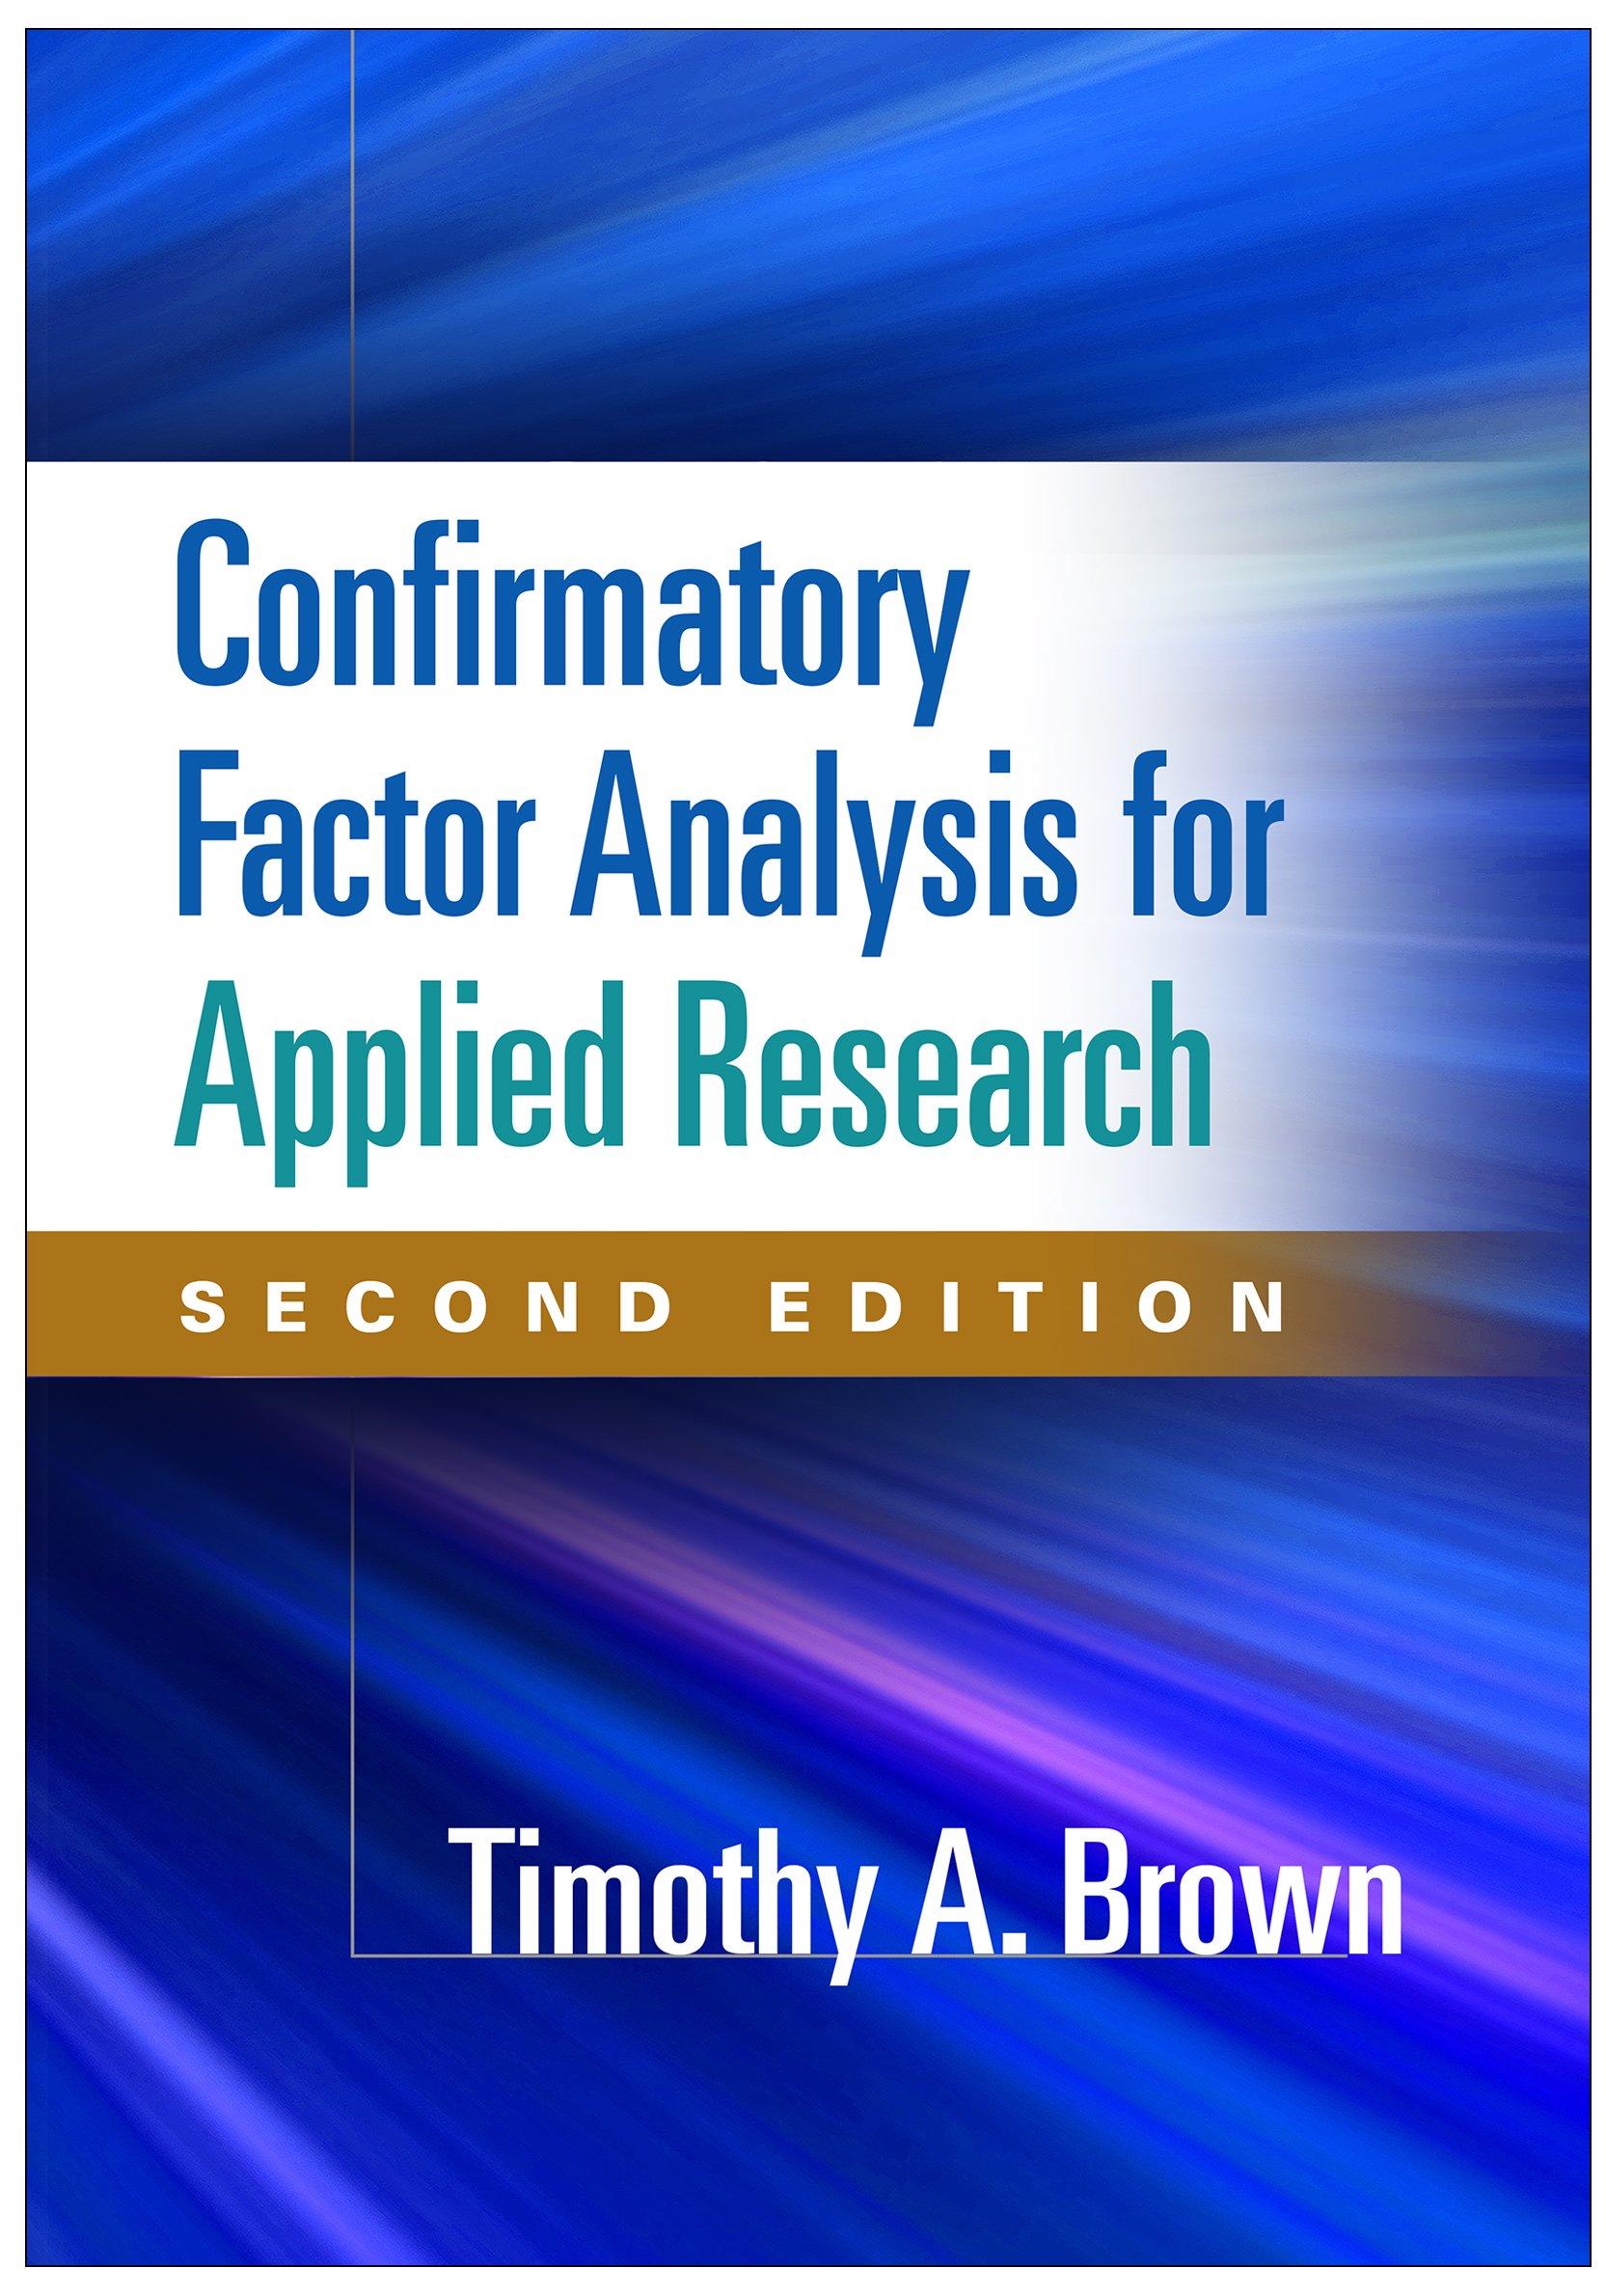 confirmatory factor analysis for applied research 2nd edition timothy a. brown 1462515363, 9781462515363